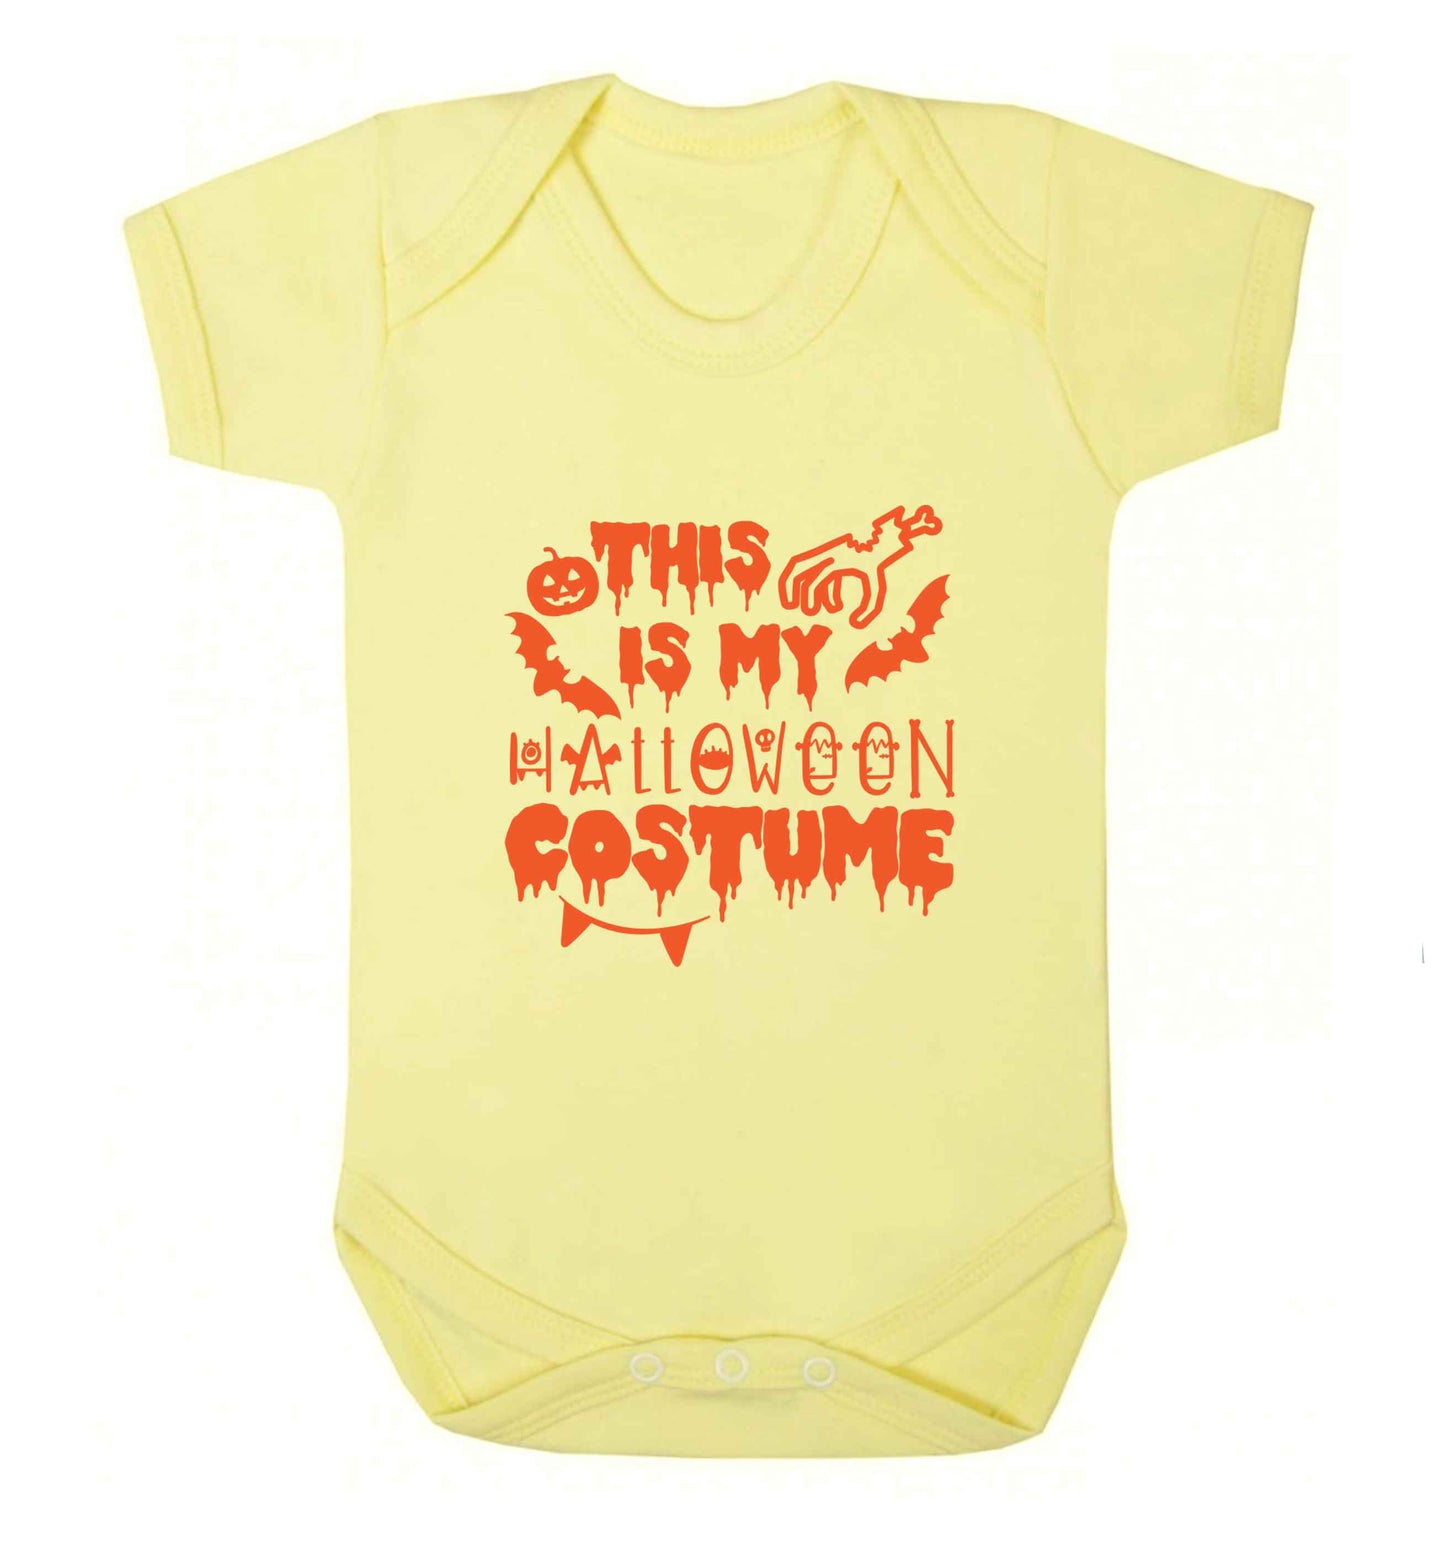 This is my halloween costume baby vest pale yellow 18-24 months